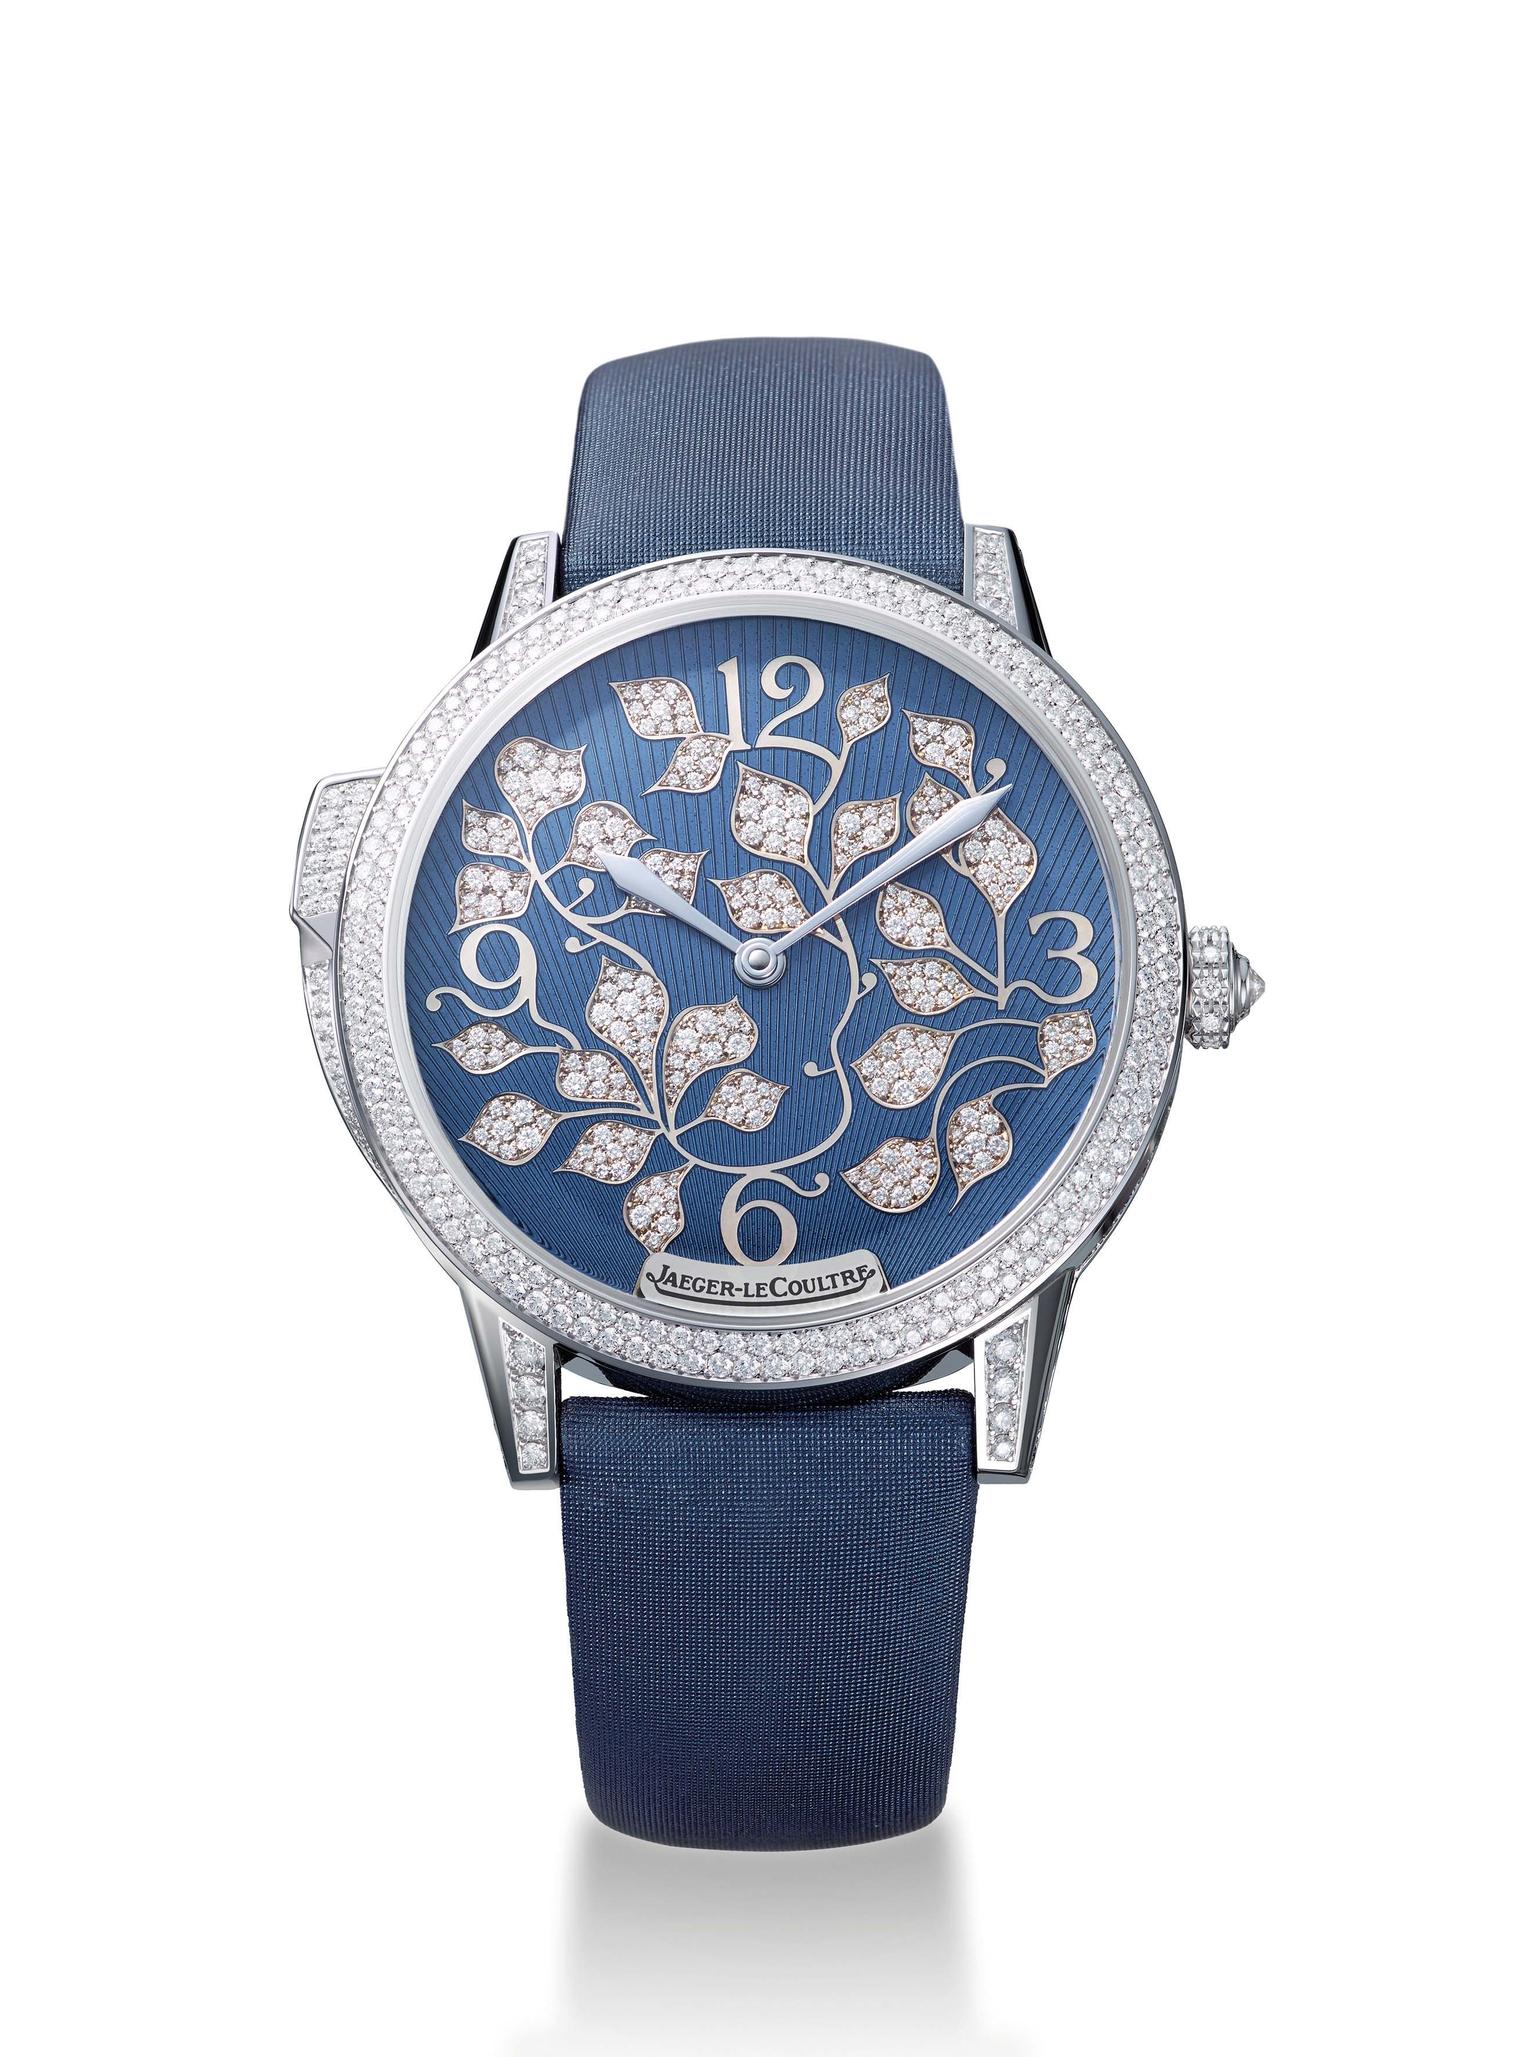 Daniel Riedo, CEO of Jaeger-LeCoultre, and his team, has unveiled the new Rendez-Vous Ivy Minute Repeater watch at Watches&Wonders in Hong Kong - the first minute repeater designed exclusively for women by the Swiss watchmaker.